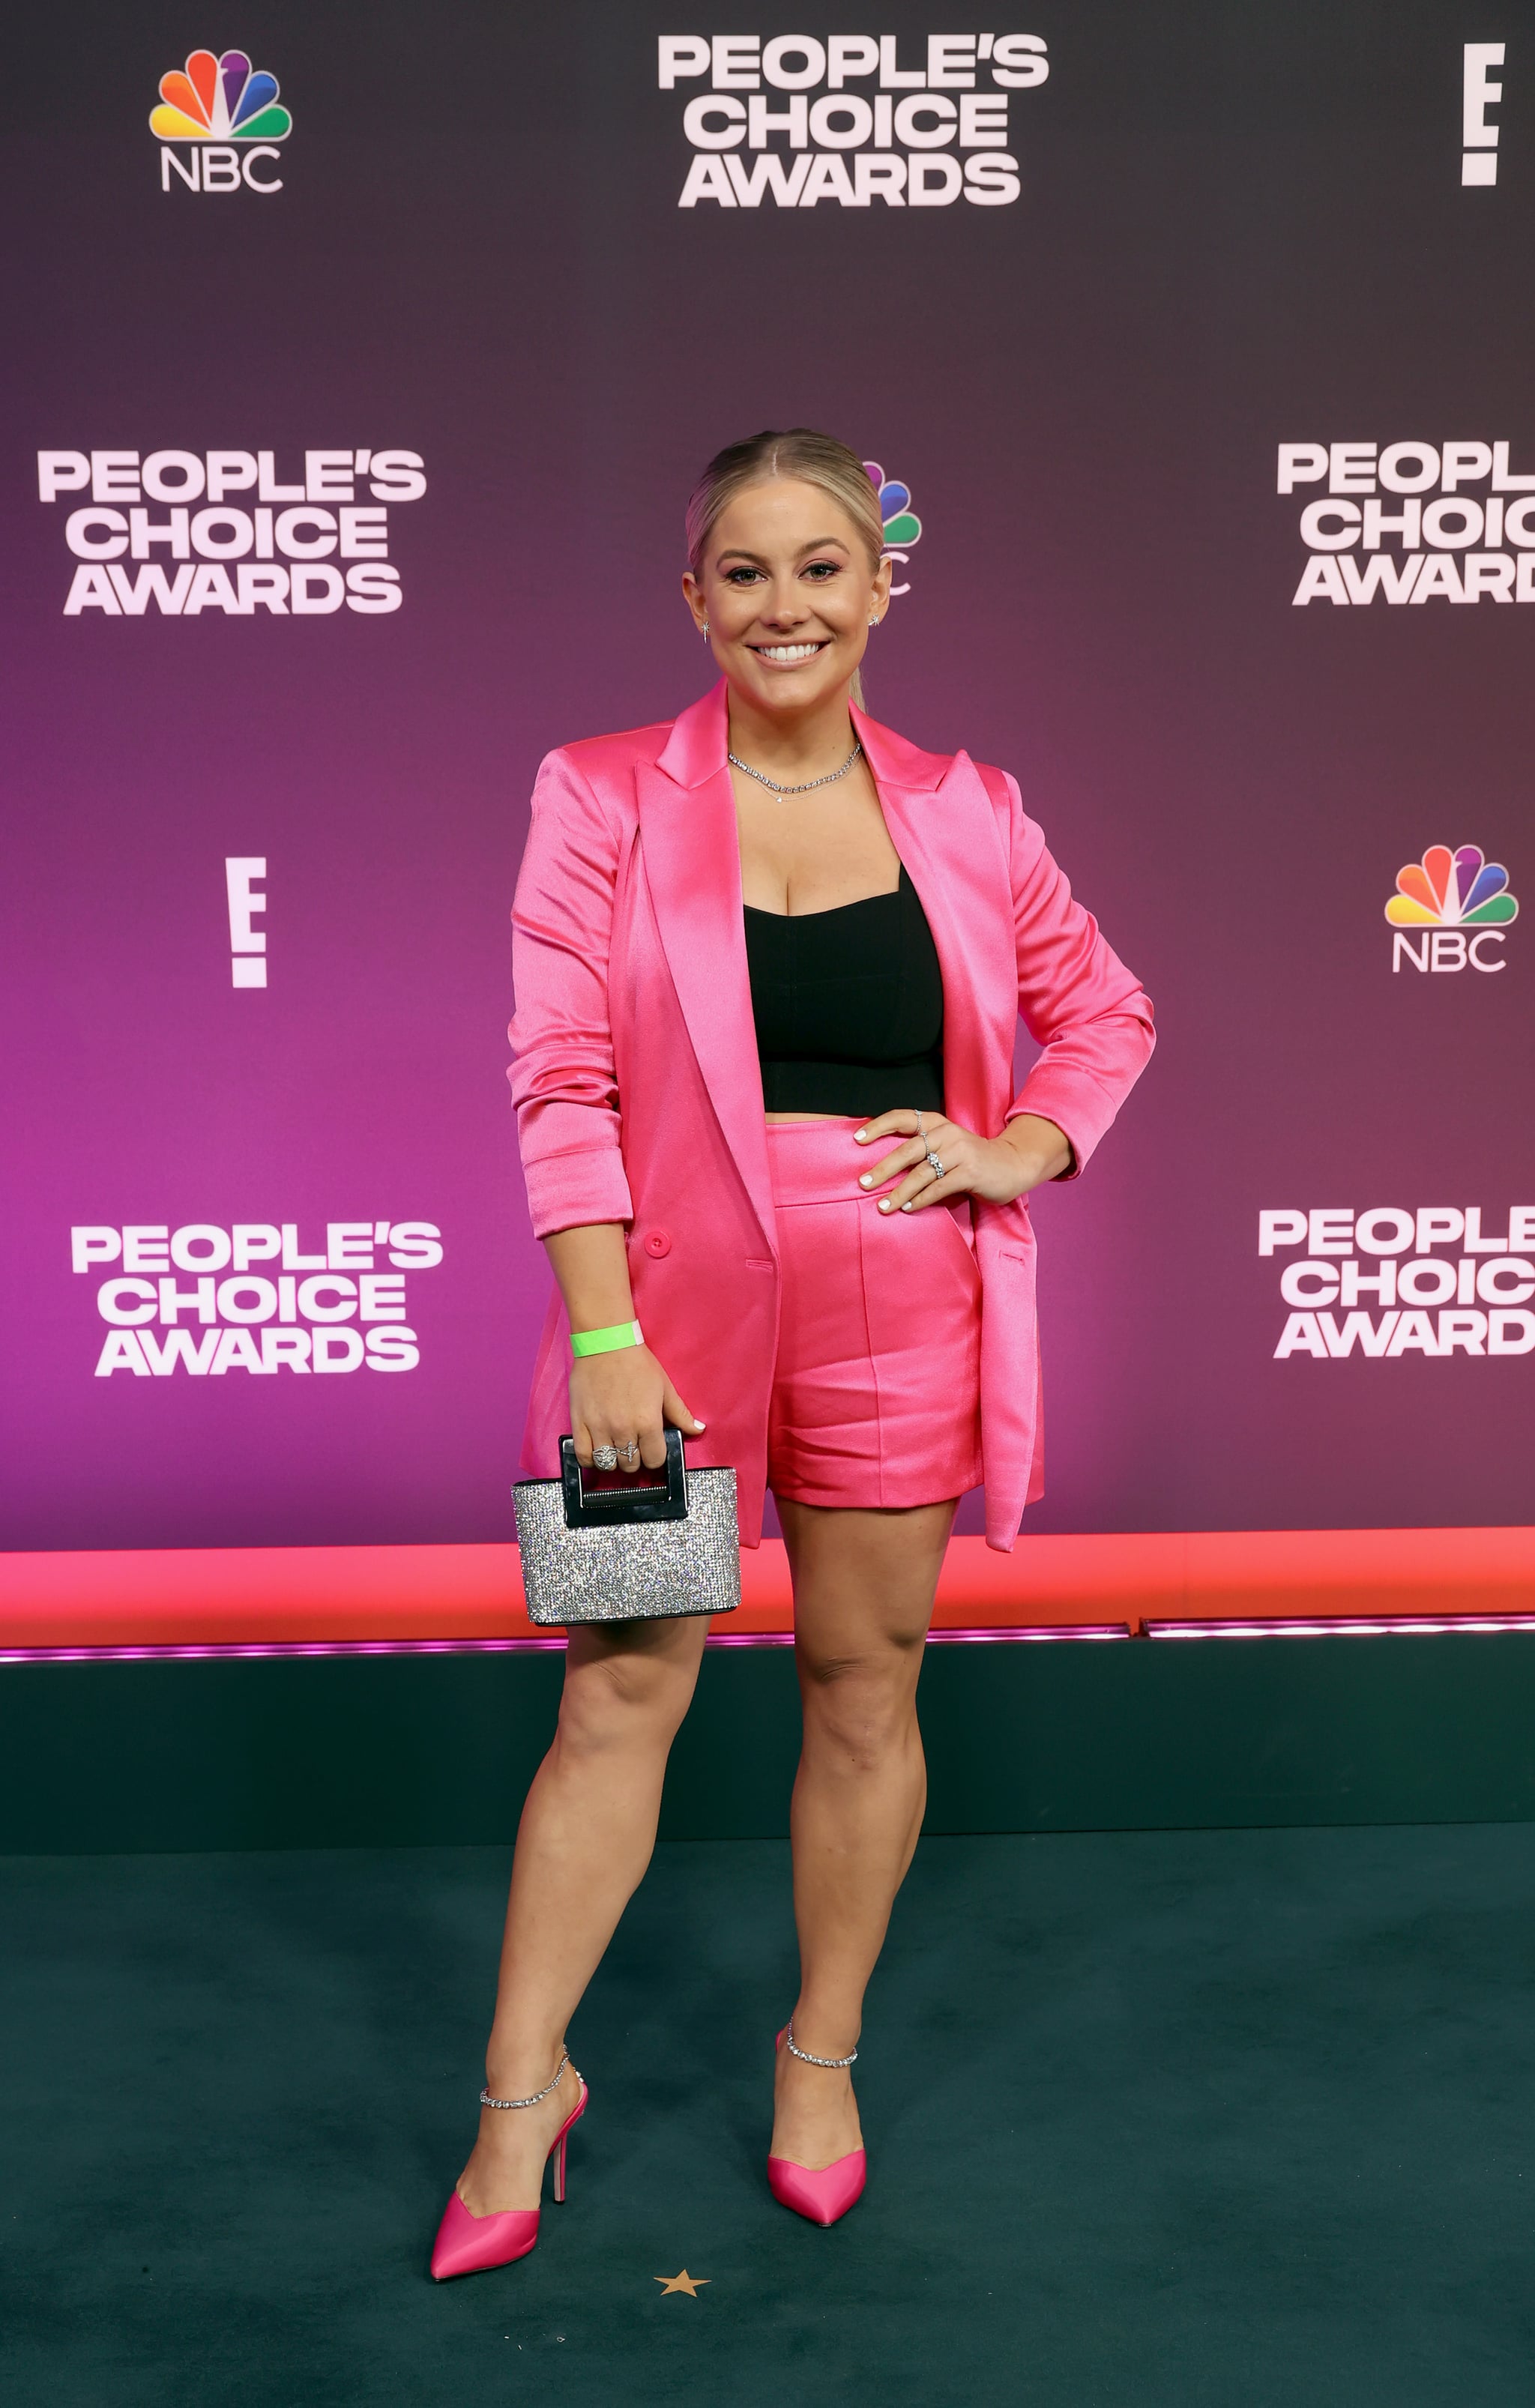 SANTA MONICA, CALIFORNIA - DECEMBER 07: 2021 PEOPLE'S CHOICE AWARDS -- Pictured: Shawn Johnson East arrives to the 2021 People's Choice Awards held at Barker Hangar on December 7, 2021 in Santa Monica, California. (Photo by Rich Polk/E! Entertainment/NBCUniversal/NBCU Photo Bank via Getty Images)